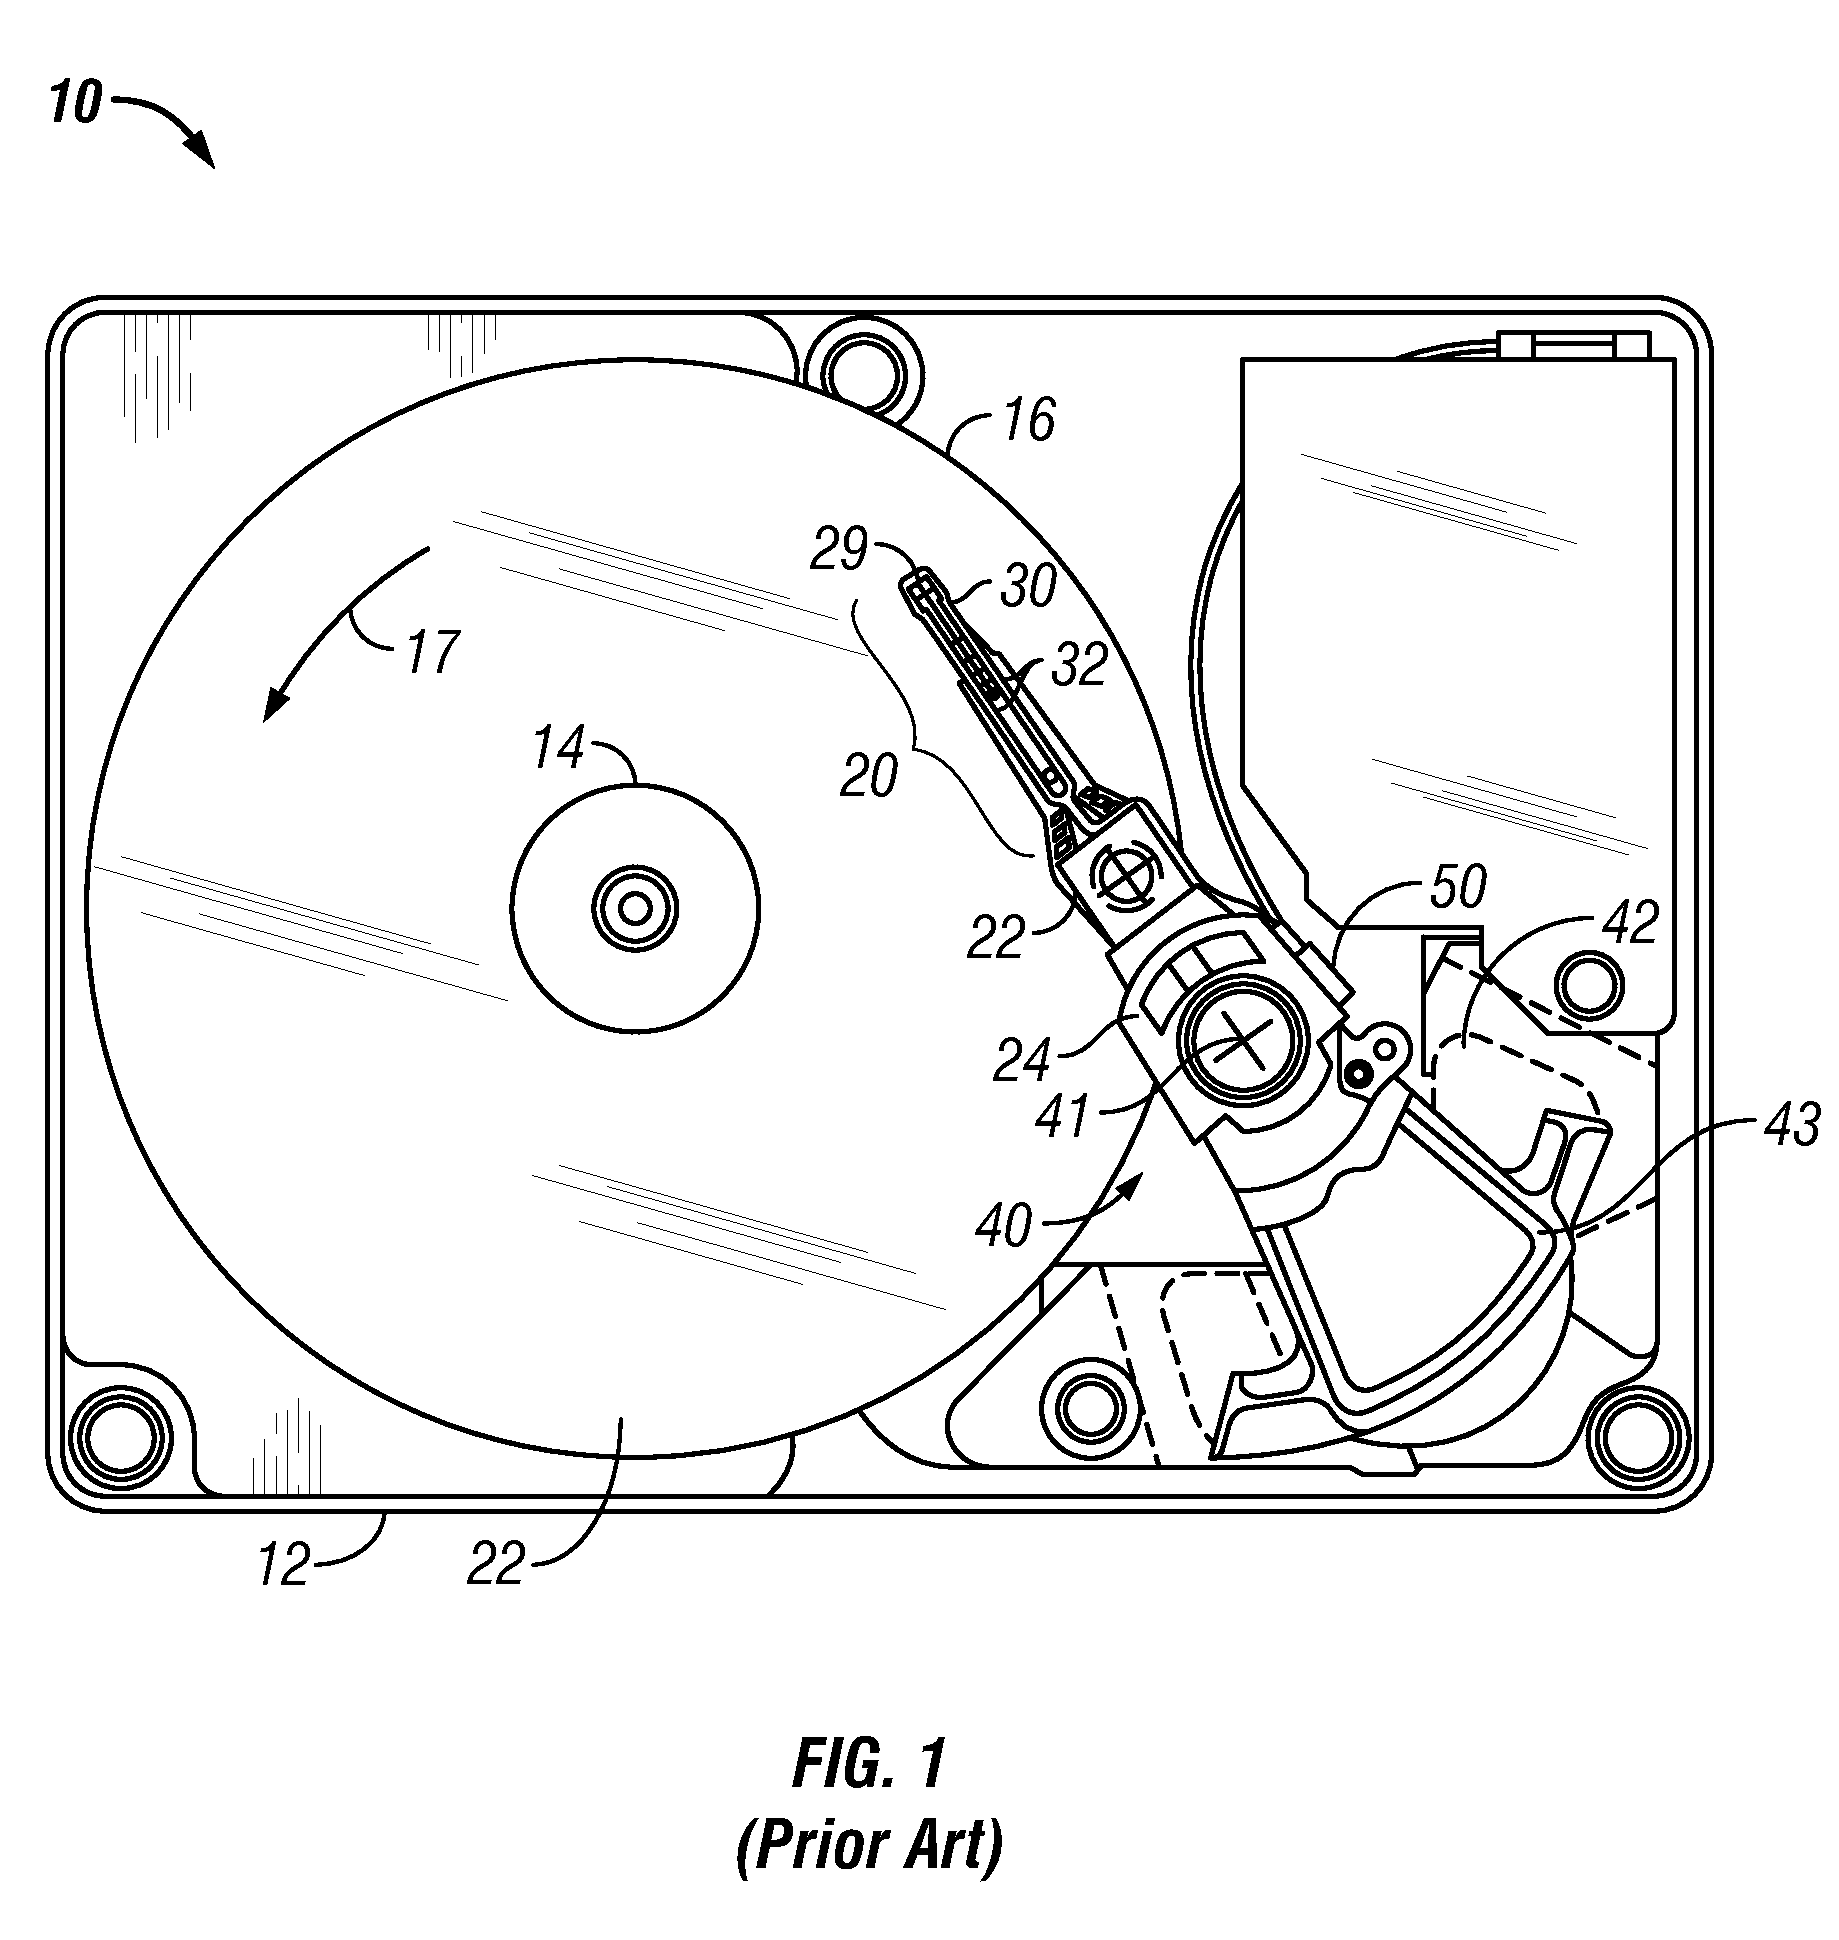 Magnetic recording disk drive with integrated lead suspension having multiple segments for optimal characteristic impedance